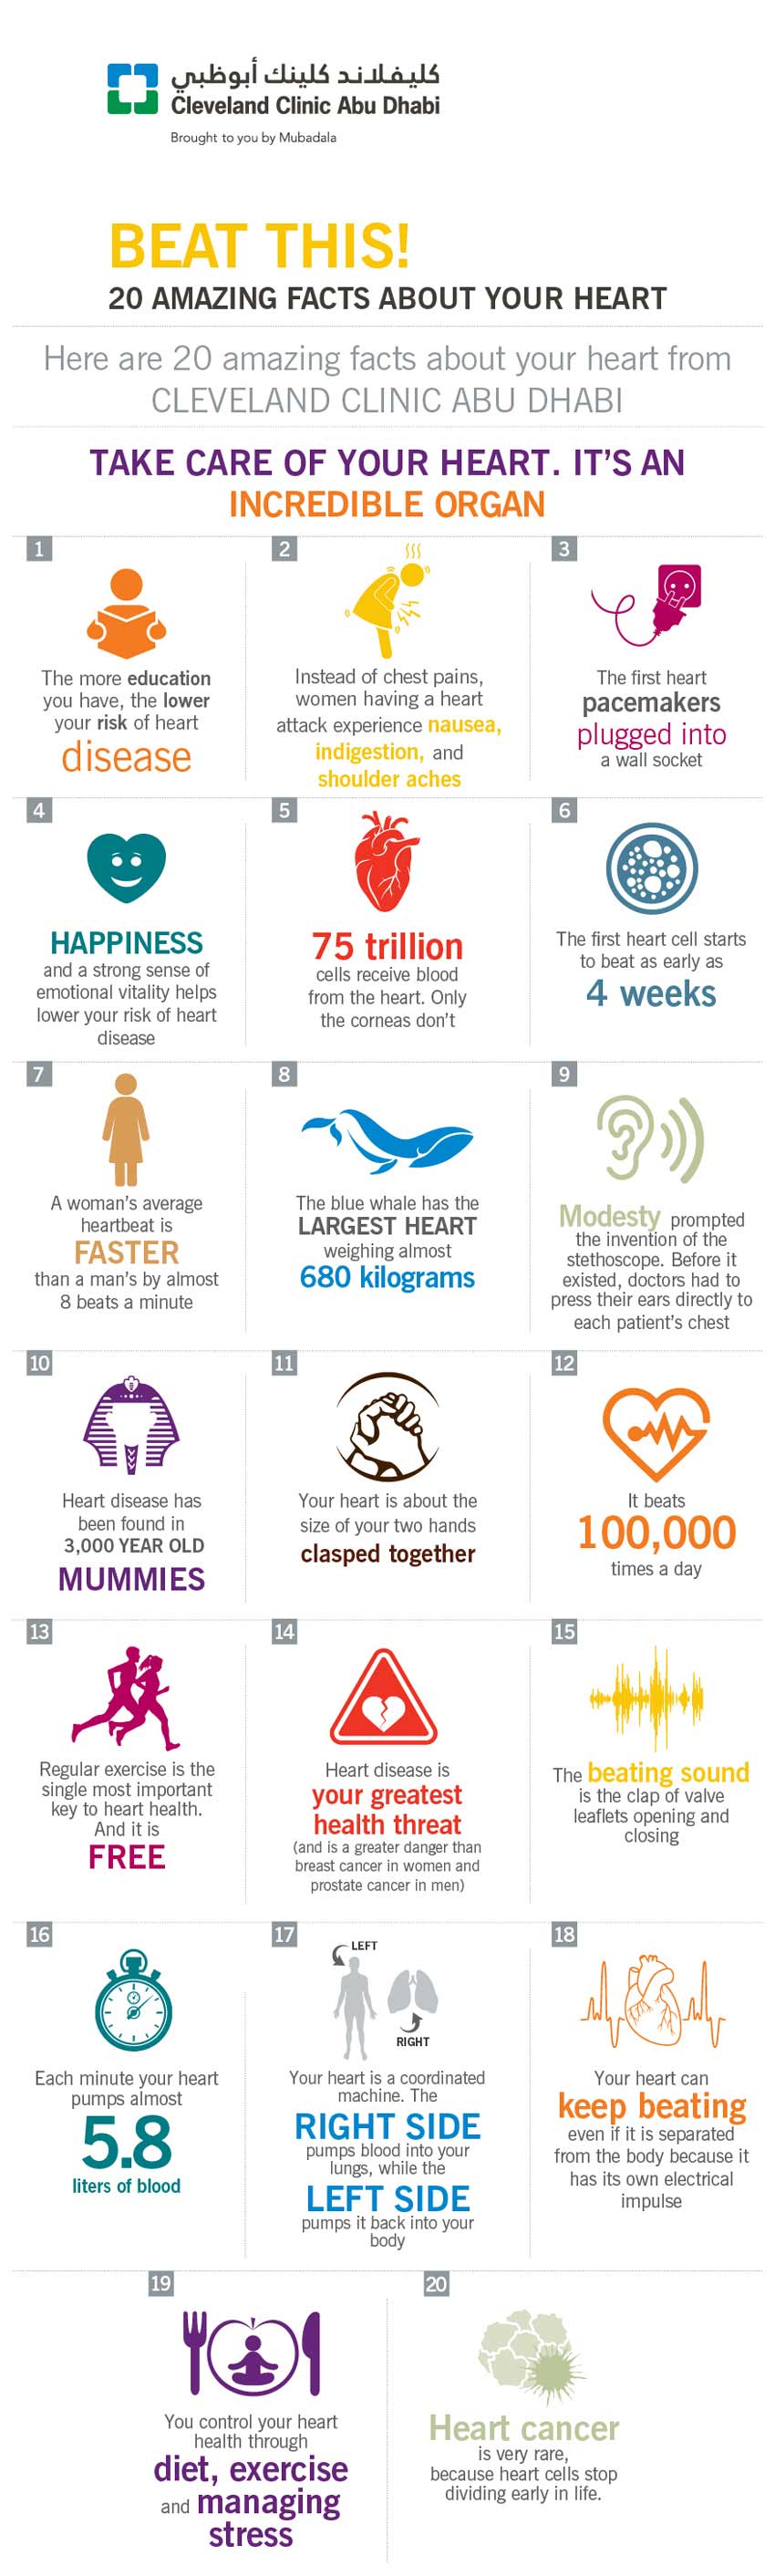 Get to know your heart better with these amazing facts.